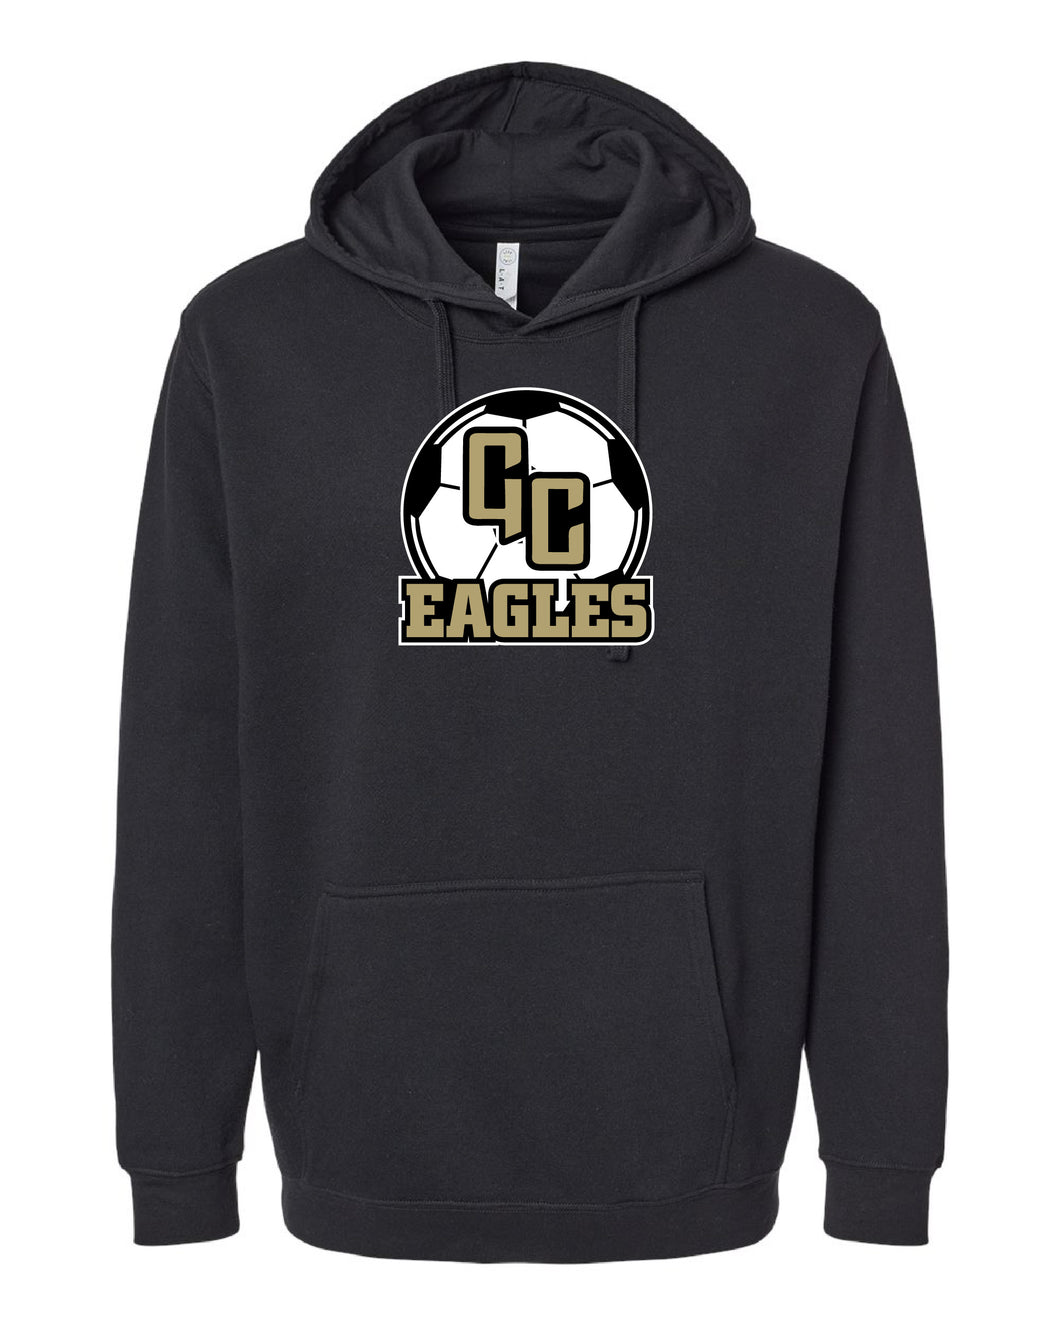 Soccer Ball Pullover Hoodie